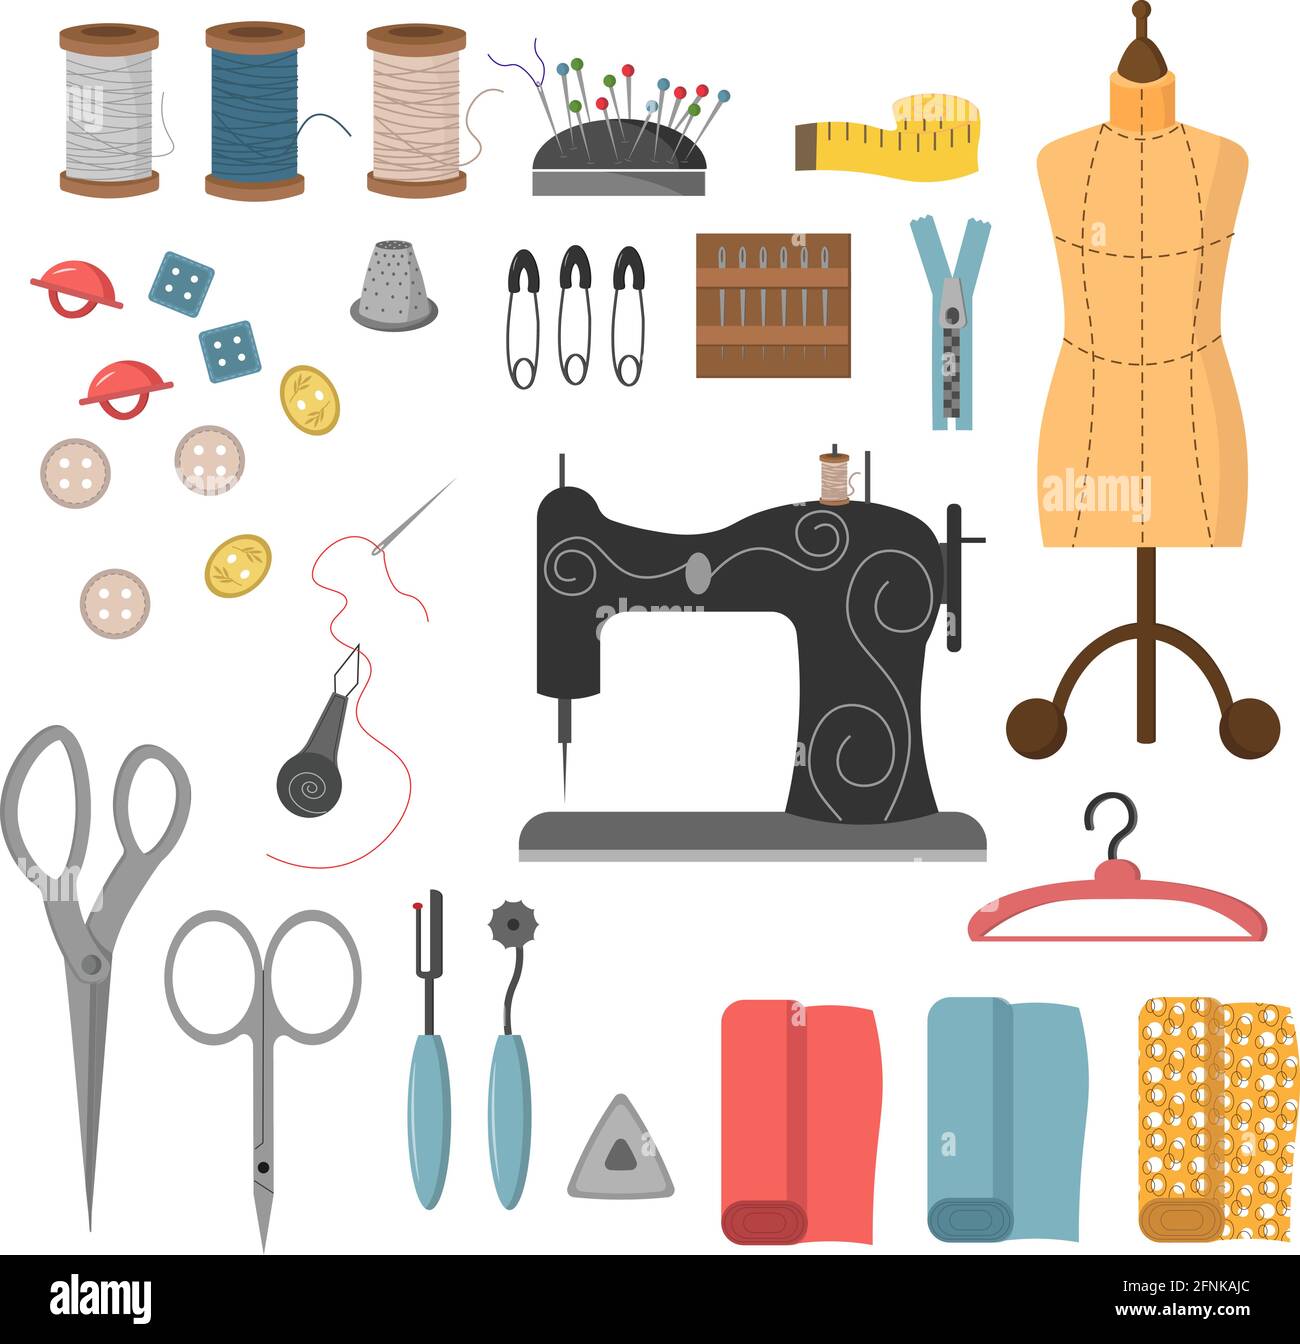 Set of sewing and embroidery tools materials Vector Image